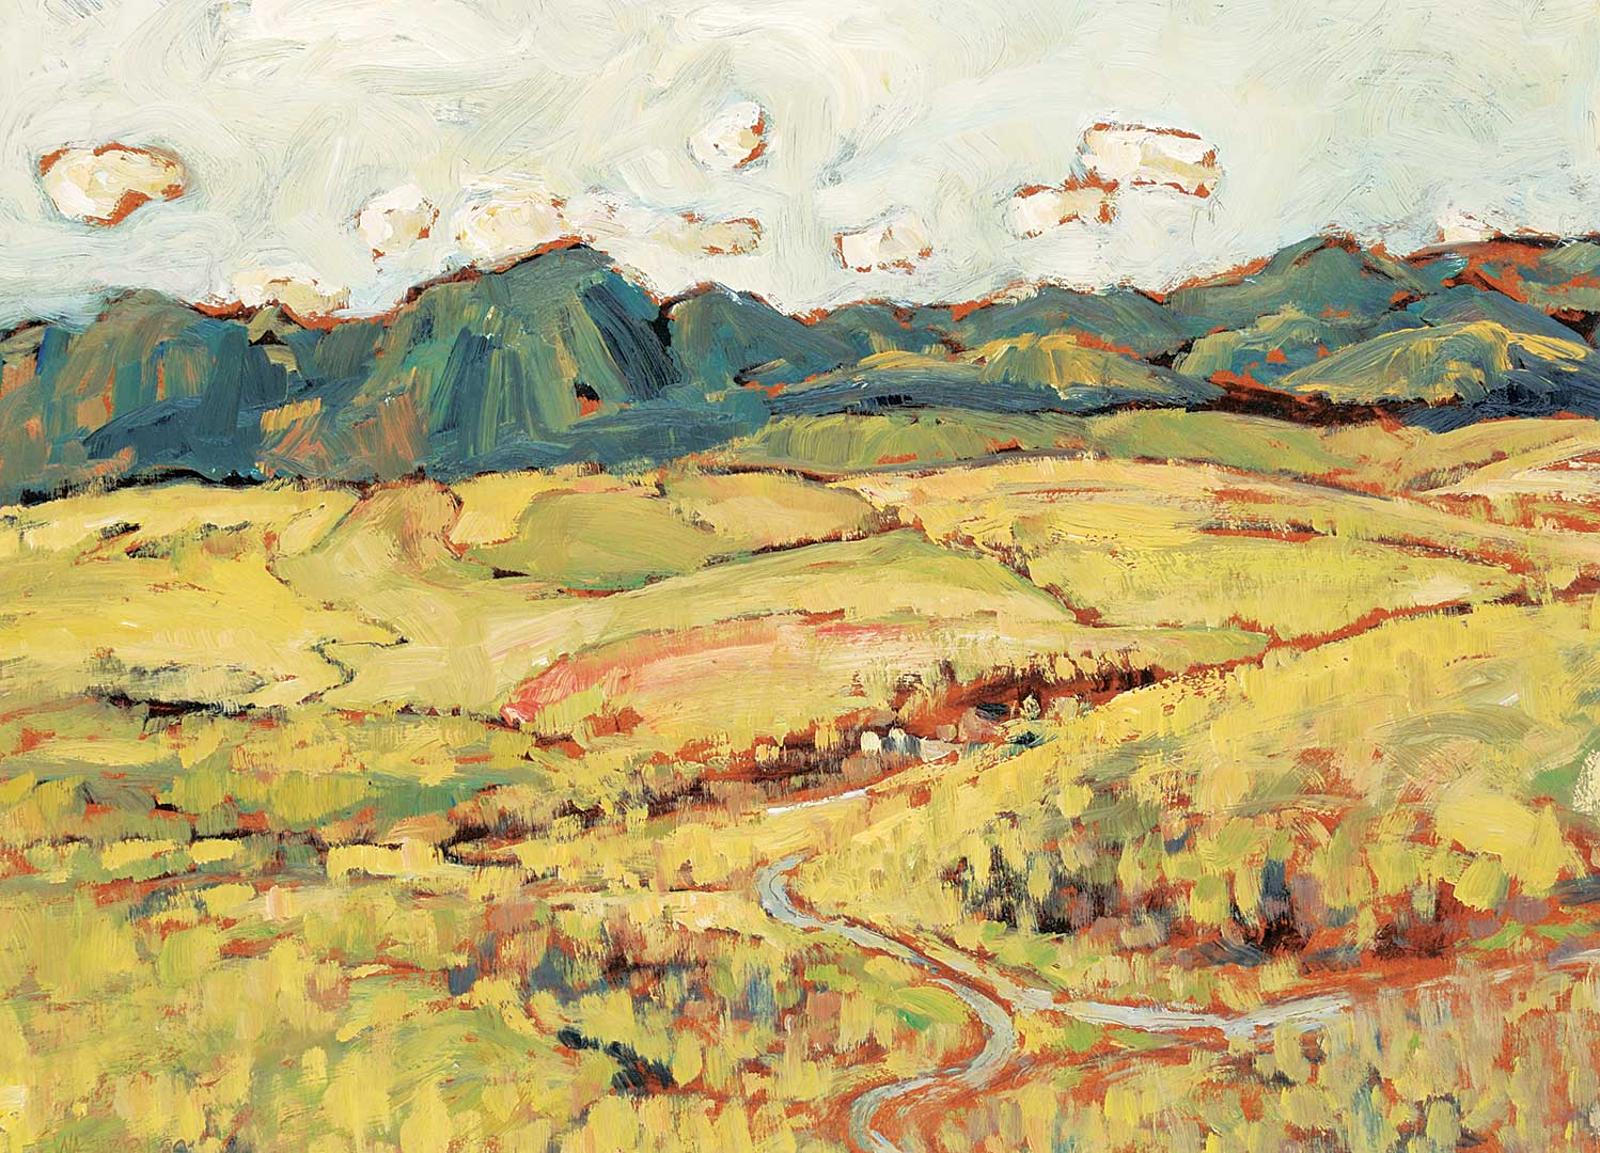 Lawrence Washburn (1940) - One Mile South of Turner Valley